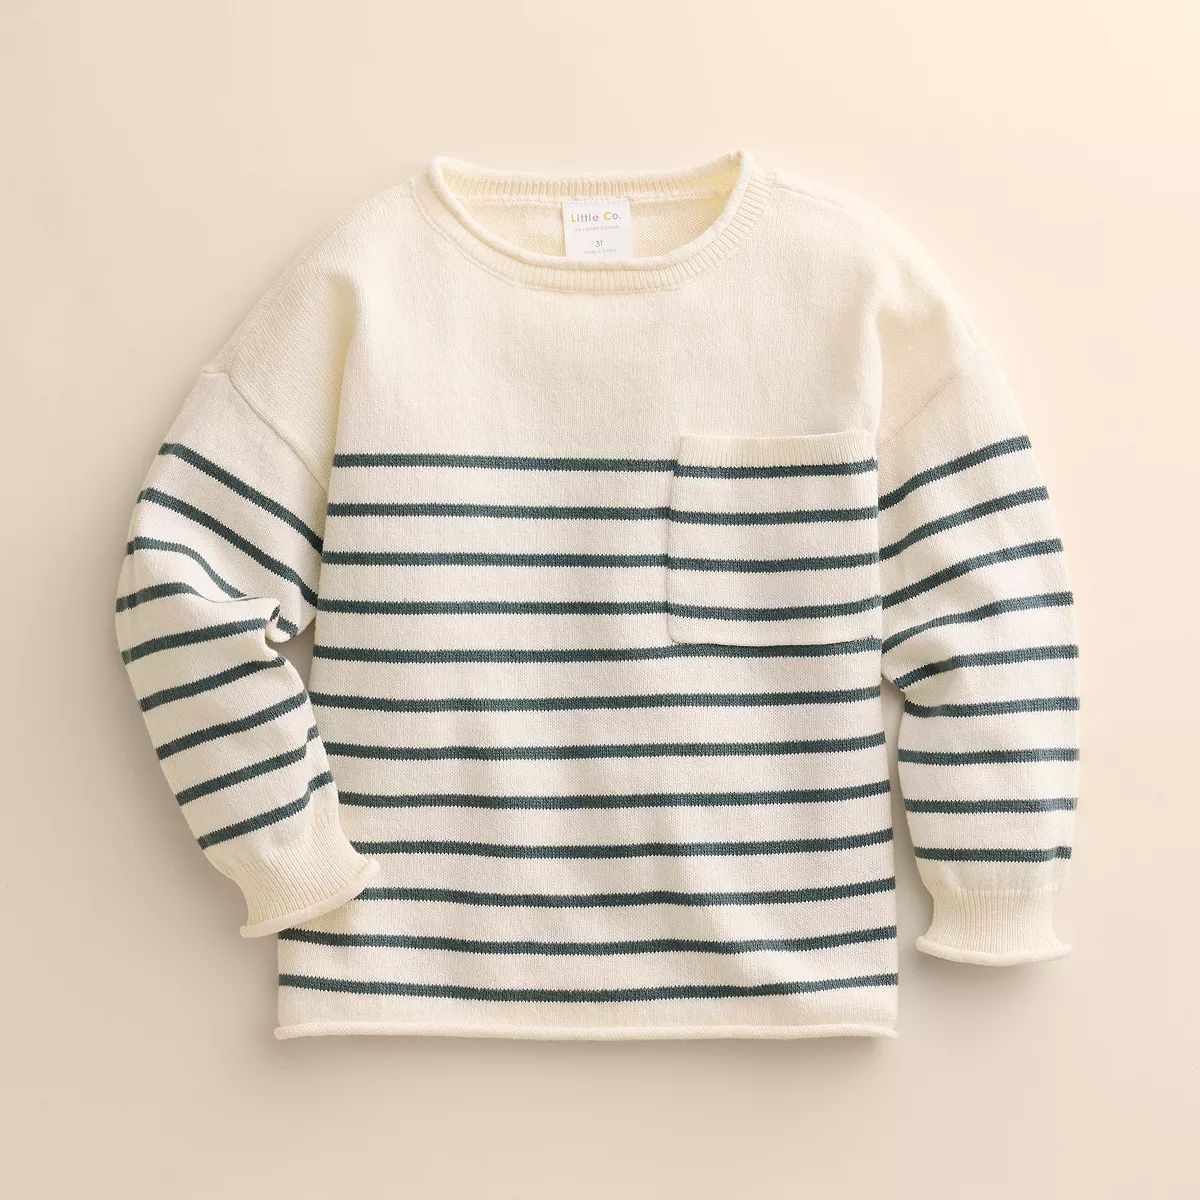 Baby & Toddler Little Co. by Lauren Conrad Beach Sweater | Kohl's